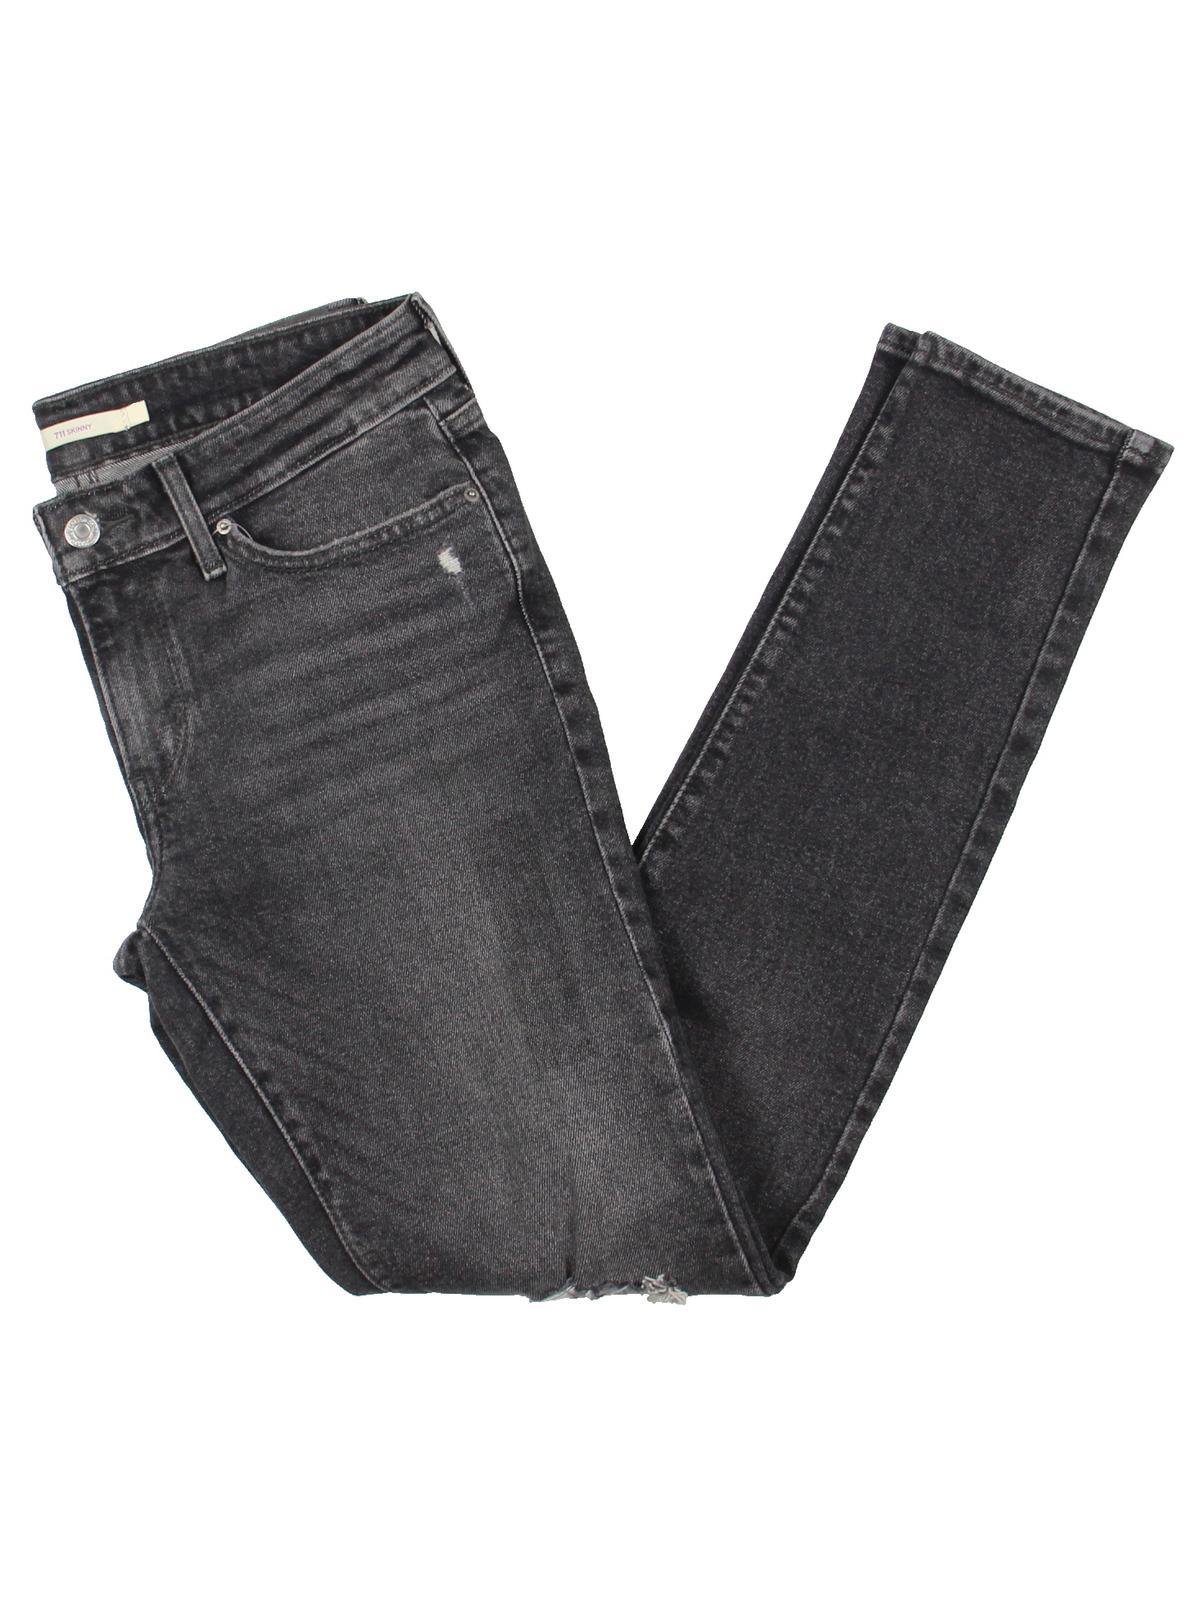 Levi's 711 Destroyed Mid-rise Skinny Jeans in Black